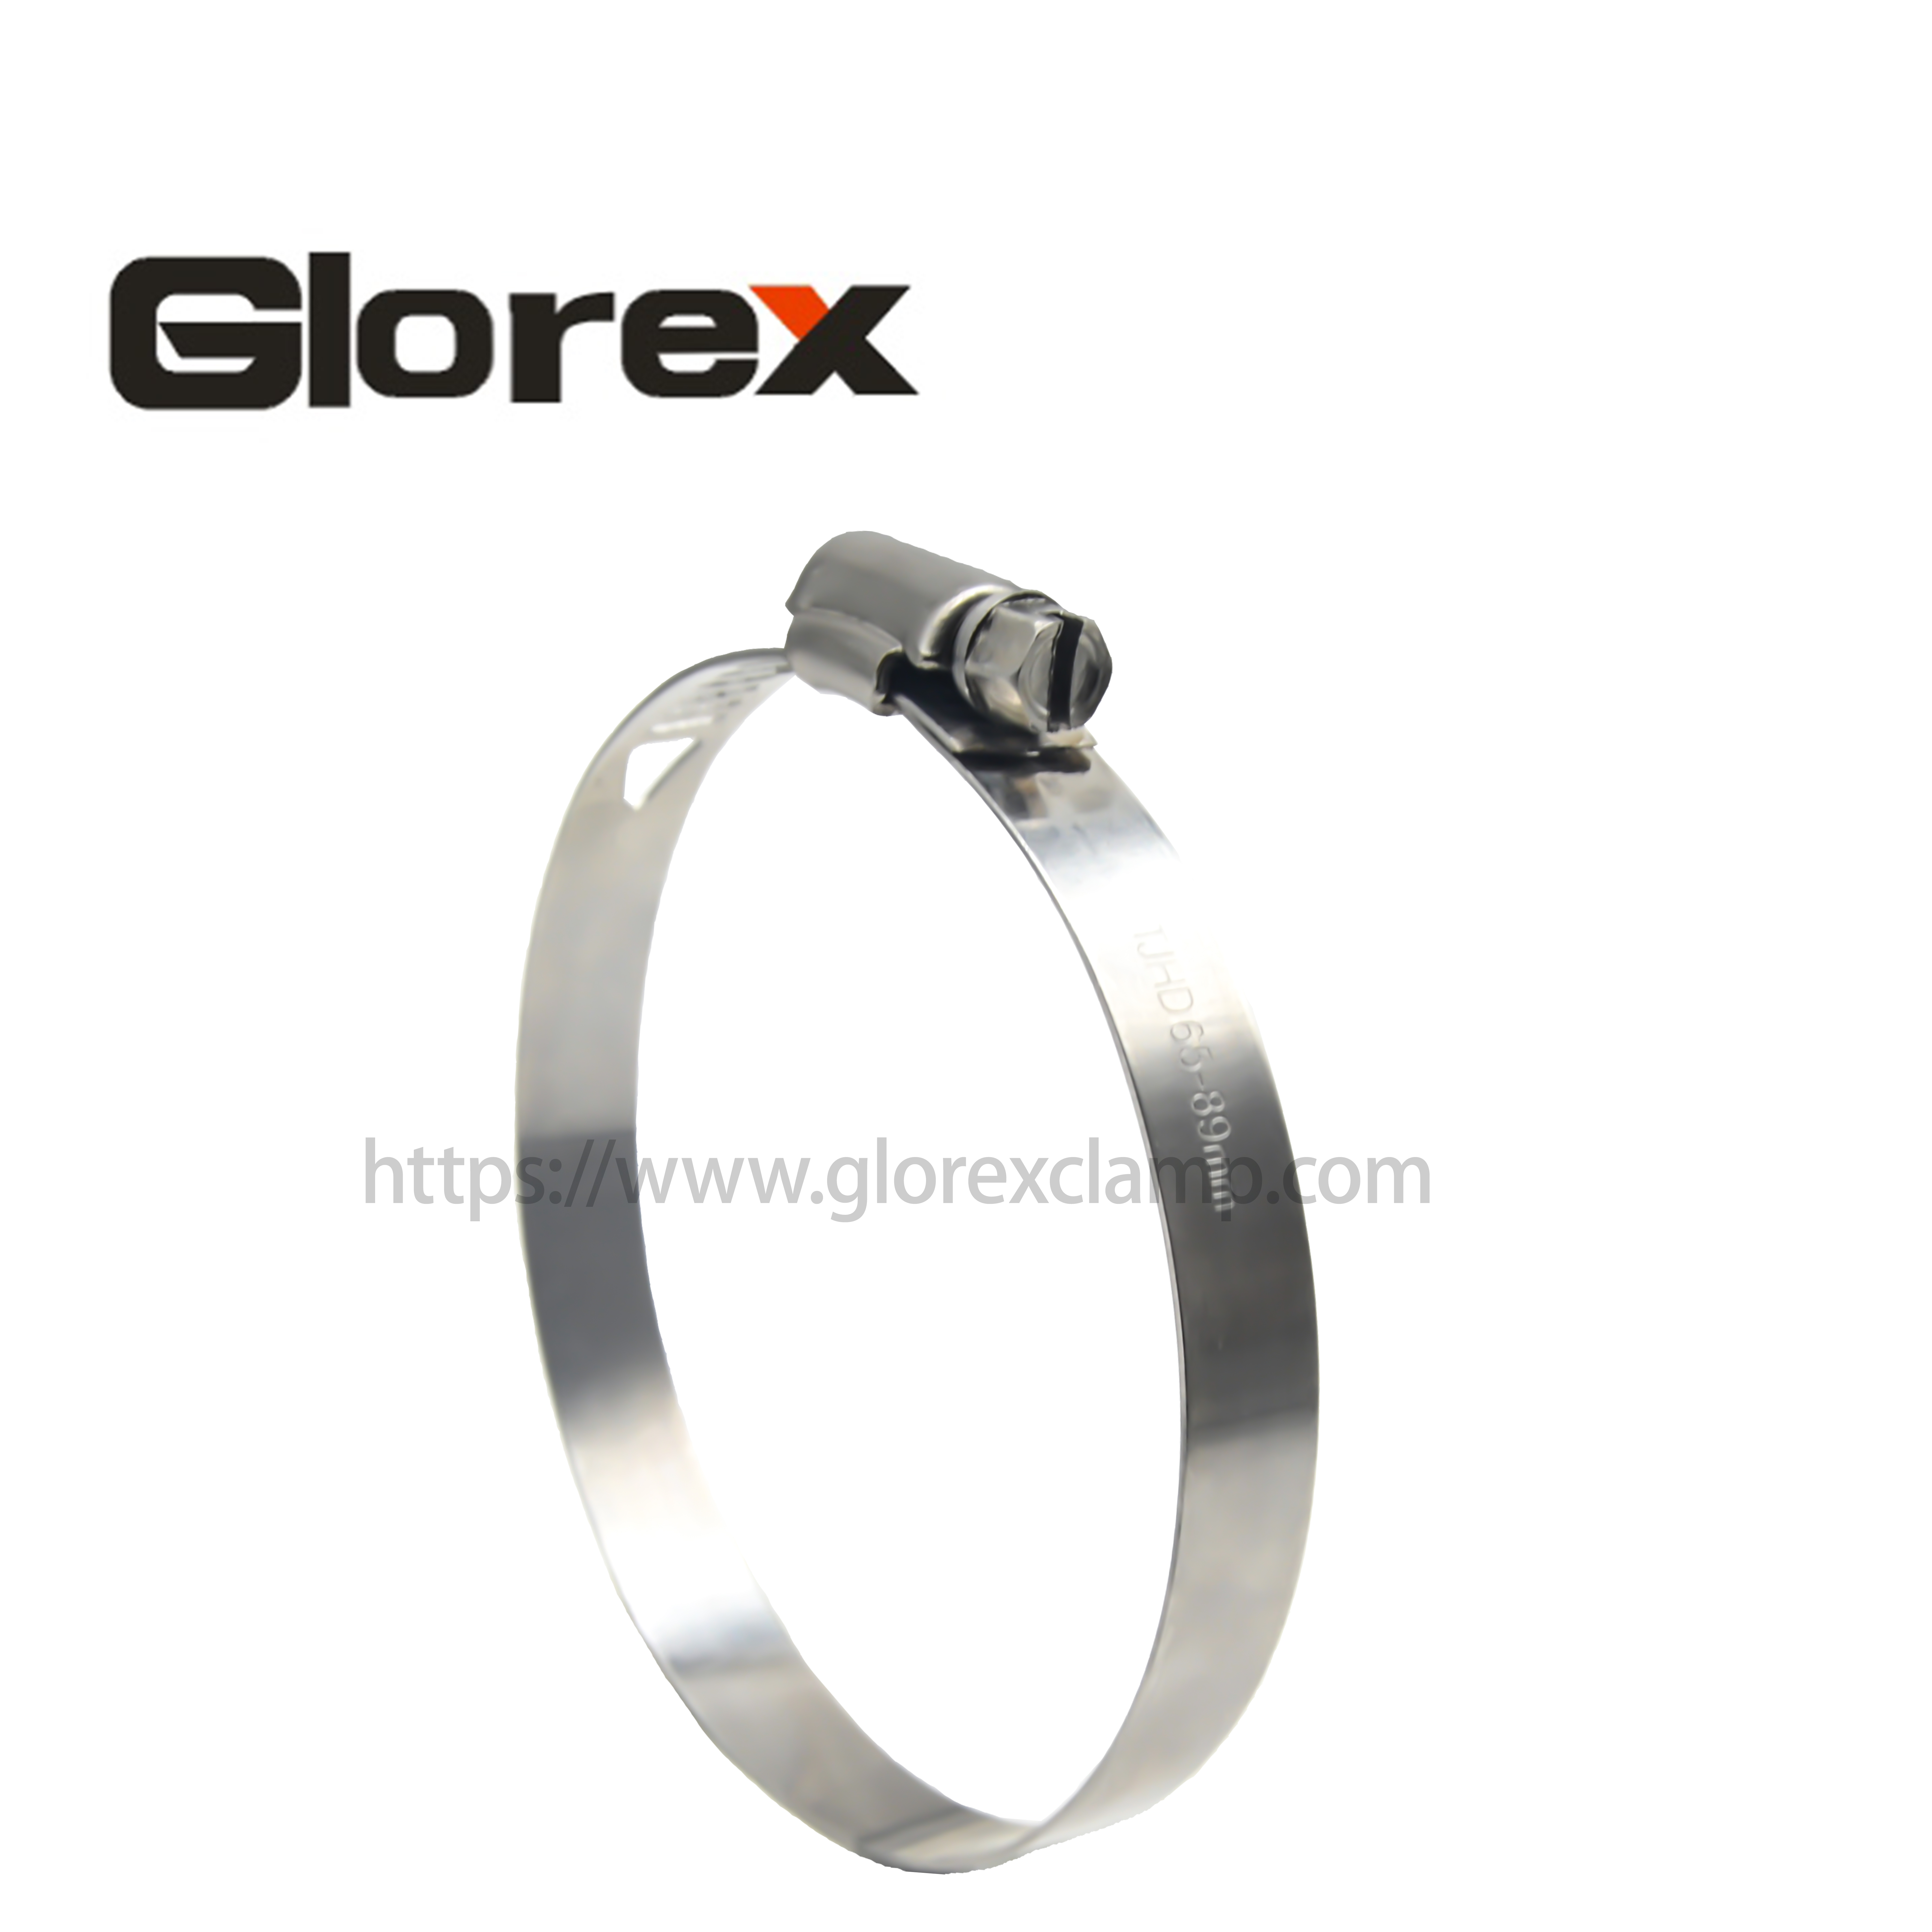 New Arrival China China Hose Clamp Stainless Steel - 10mm American type hose clmp – Glorex